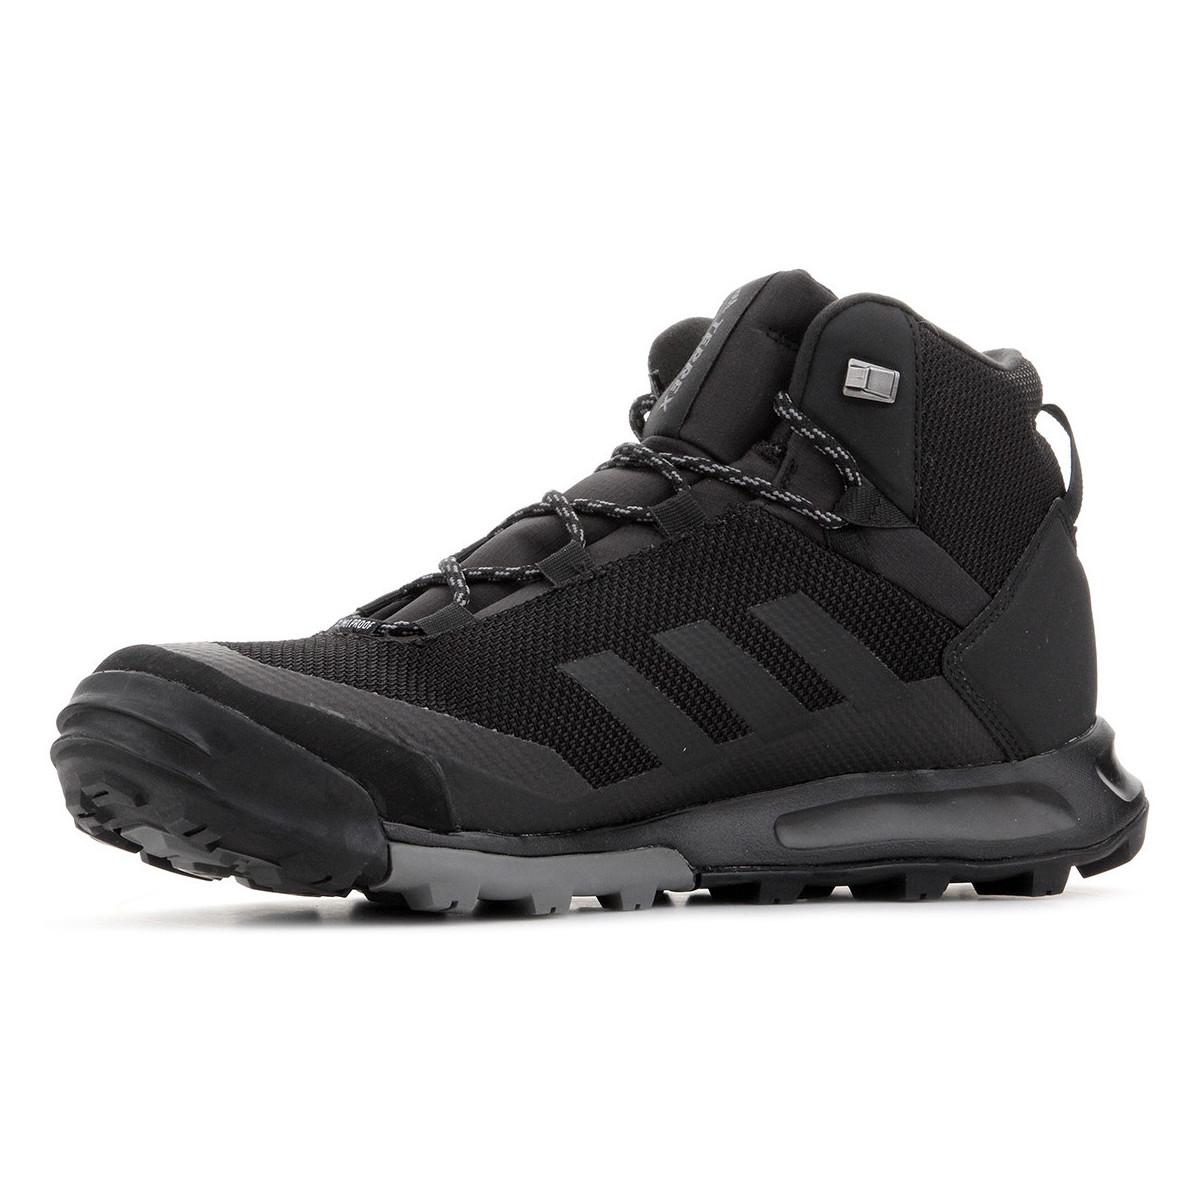 adidas performance terrex tivid mid cp for Sale OFF 60%